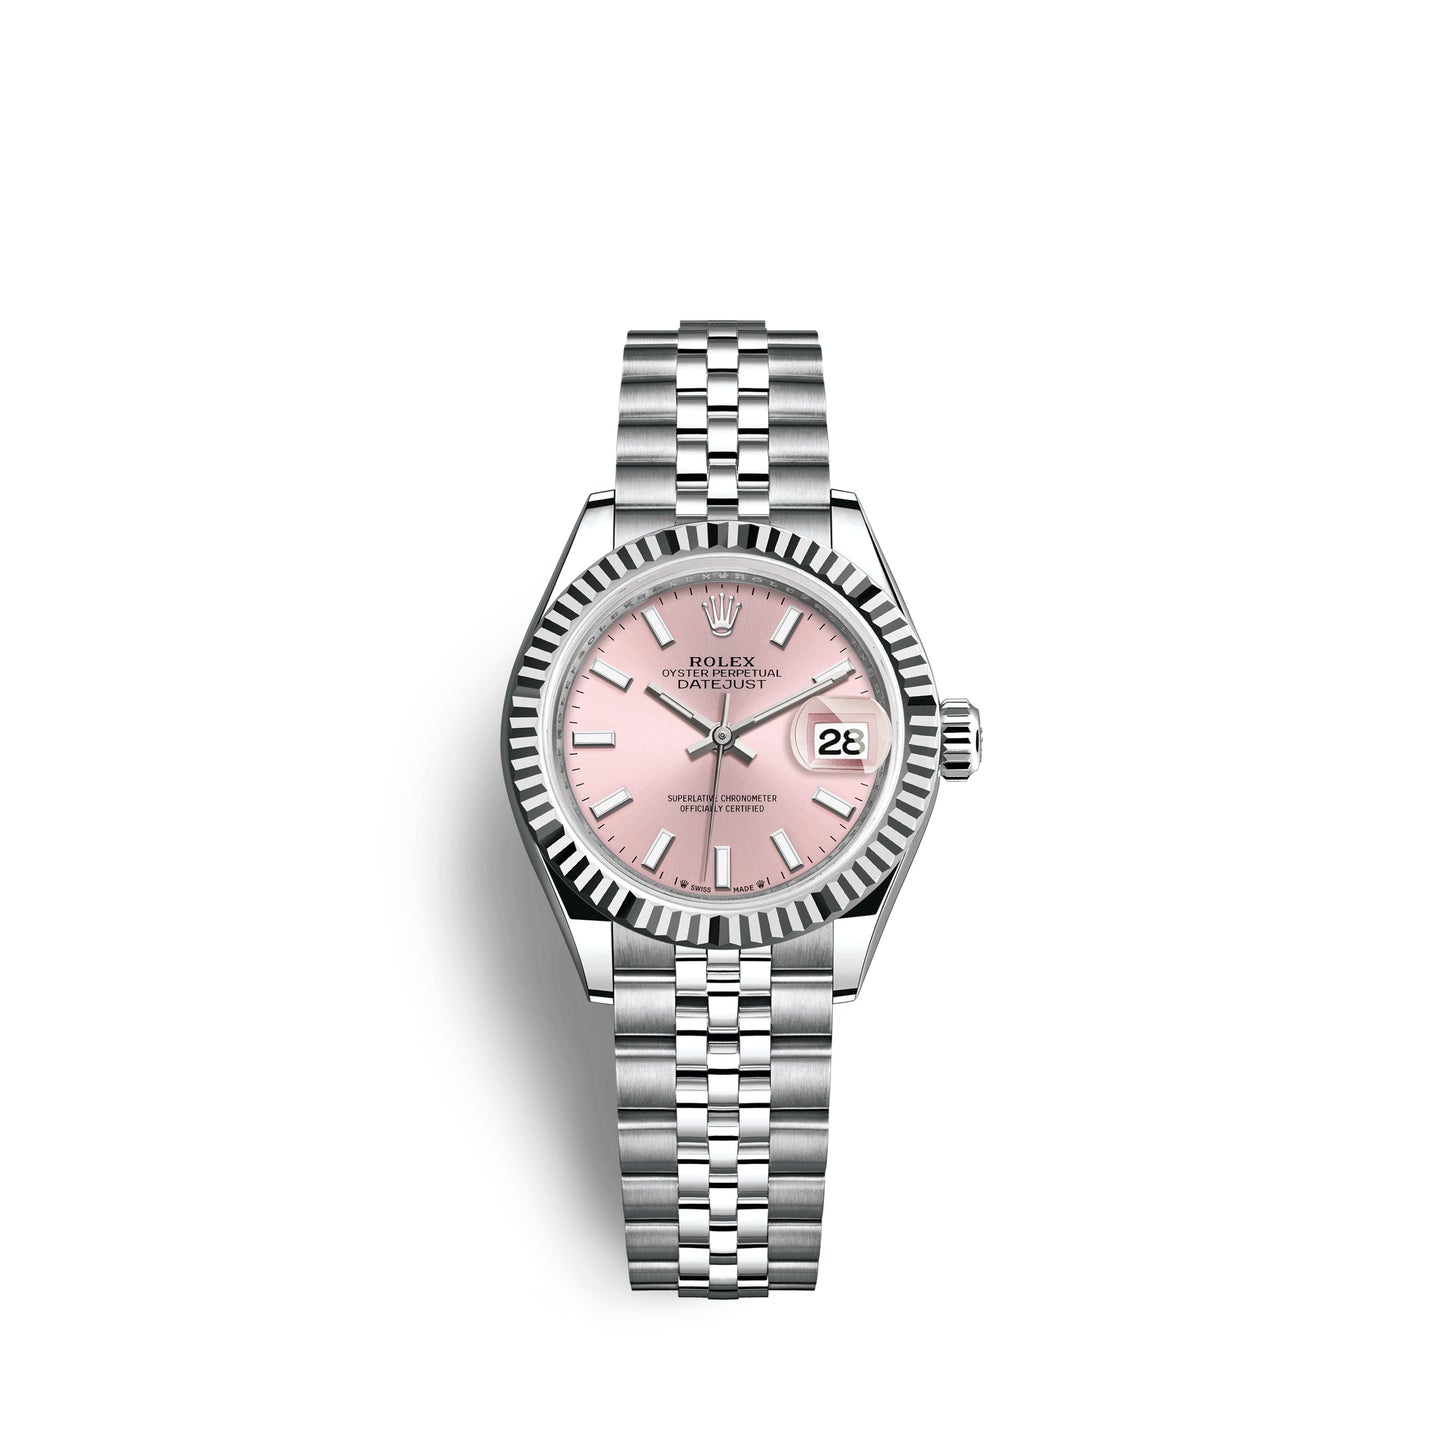 Rolex Lady-Datejust 28, Oystersteel and 18k White Gold, Ref# 279174-0001